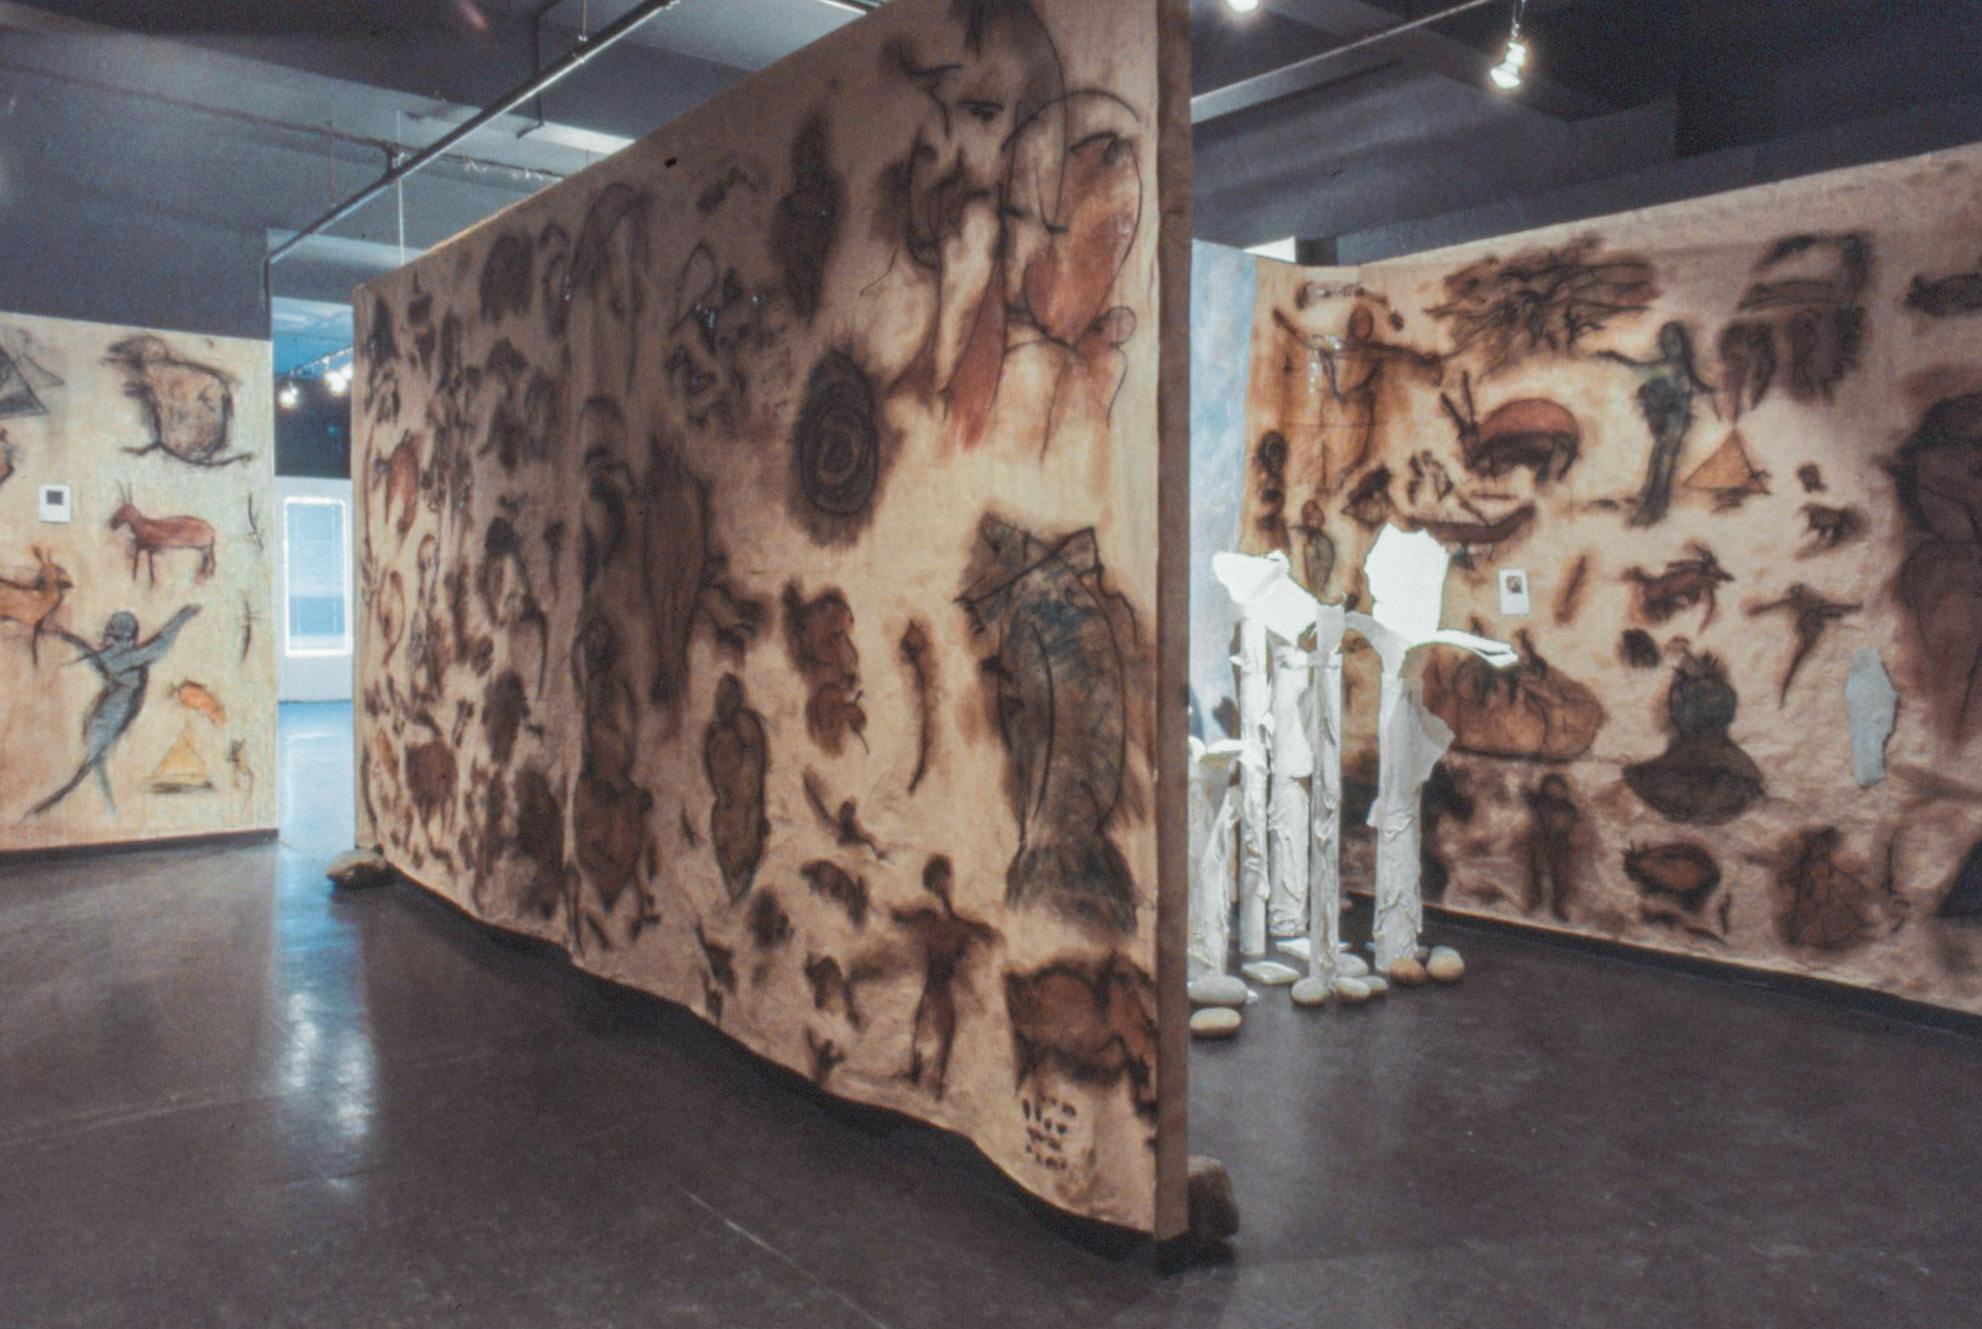 A gallery space with walls covered in pale brown paper that has chalky drawings of animals and people. One area is sectioned off by walls and tall white sculptures are partially visible.